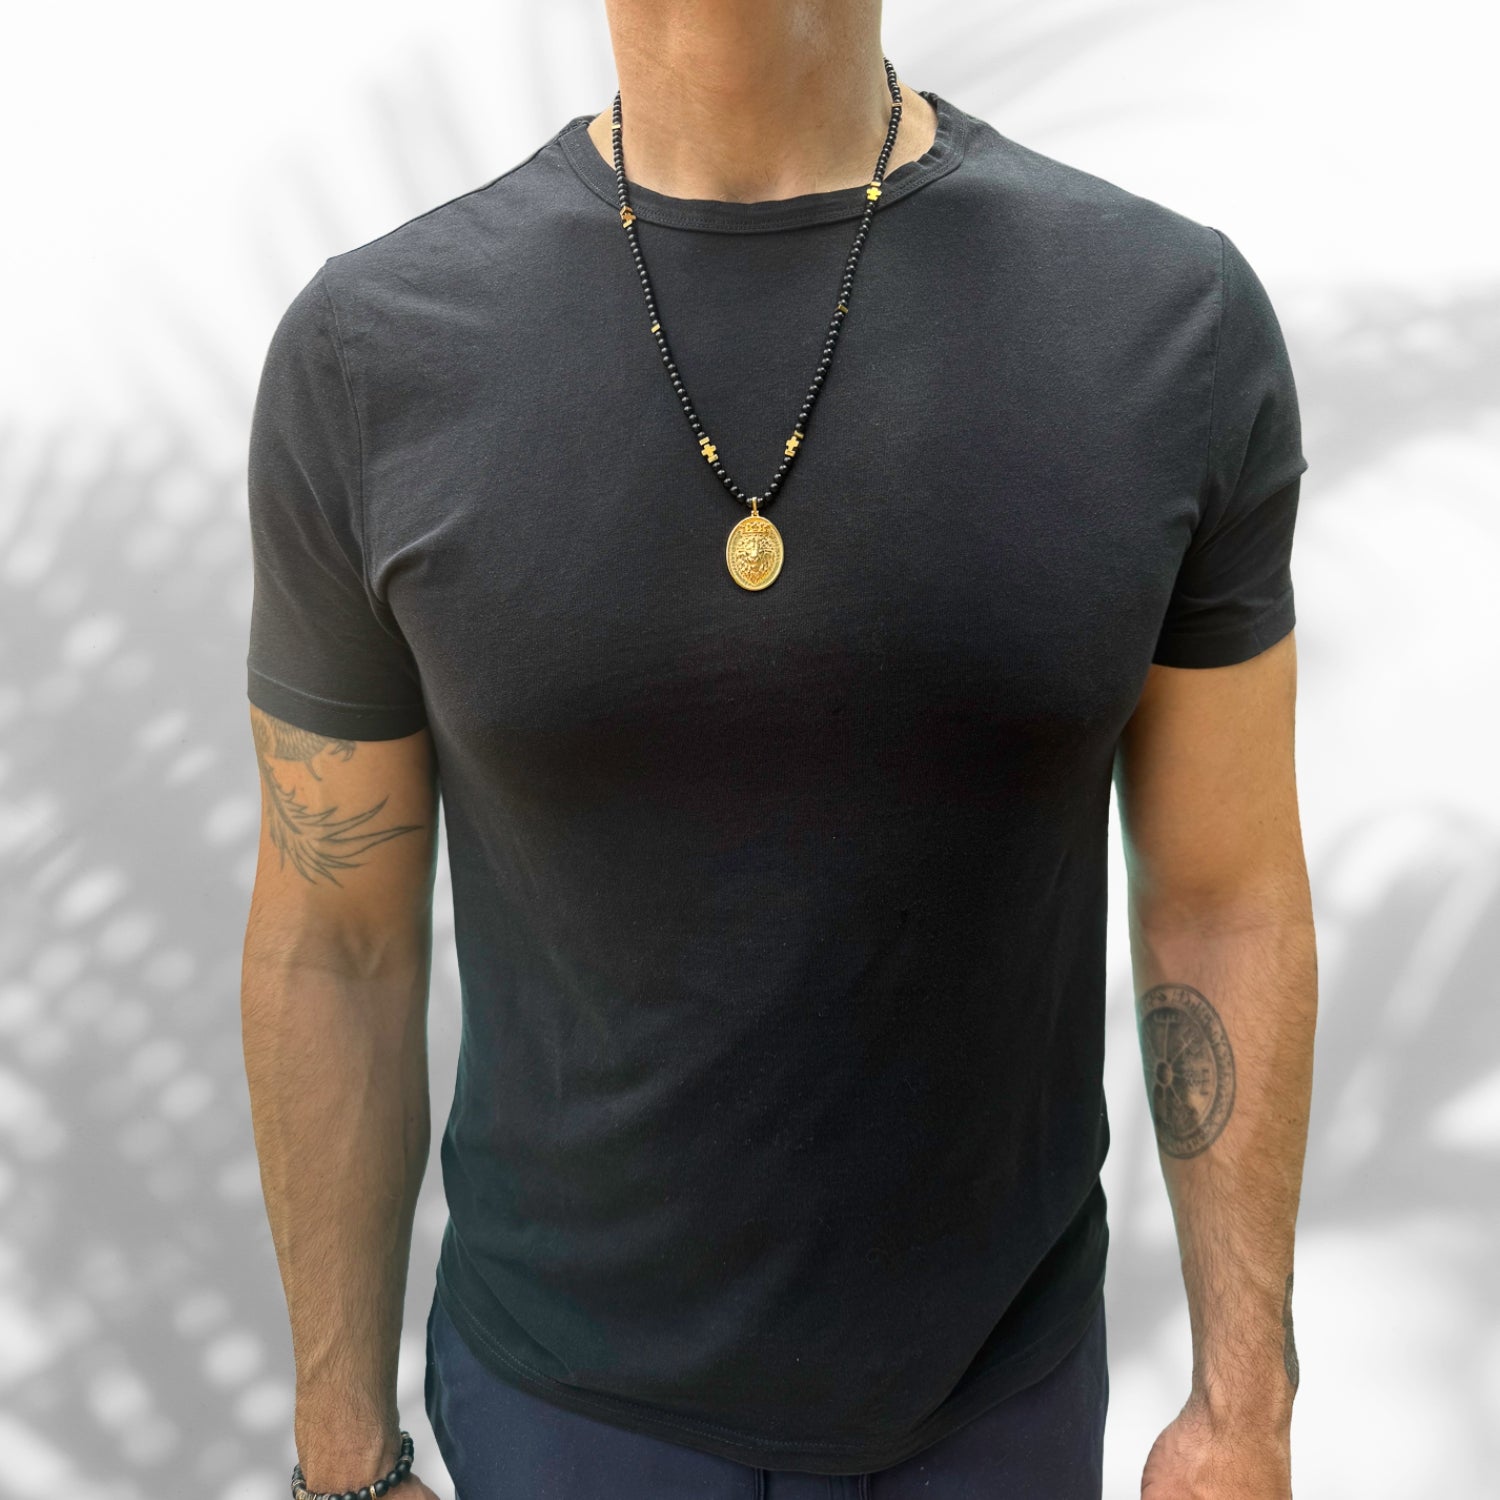 Unique men's necklace with 4mm black onyx stones and a striking 24k gold-plated lion pendant